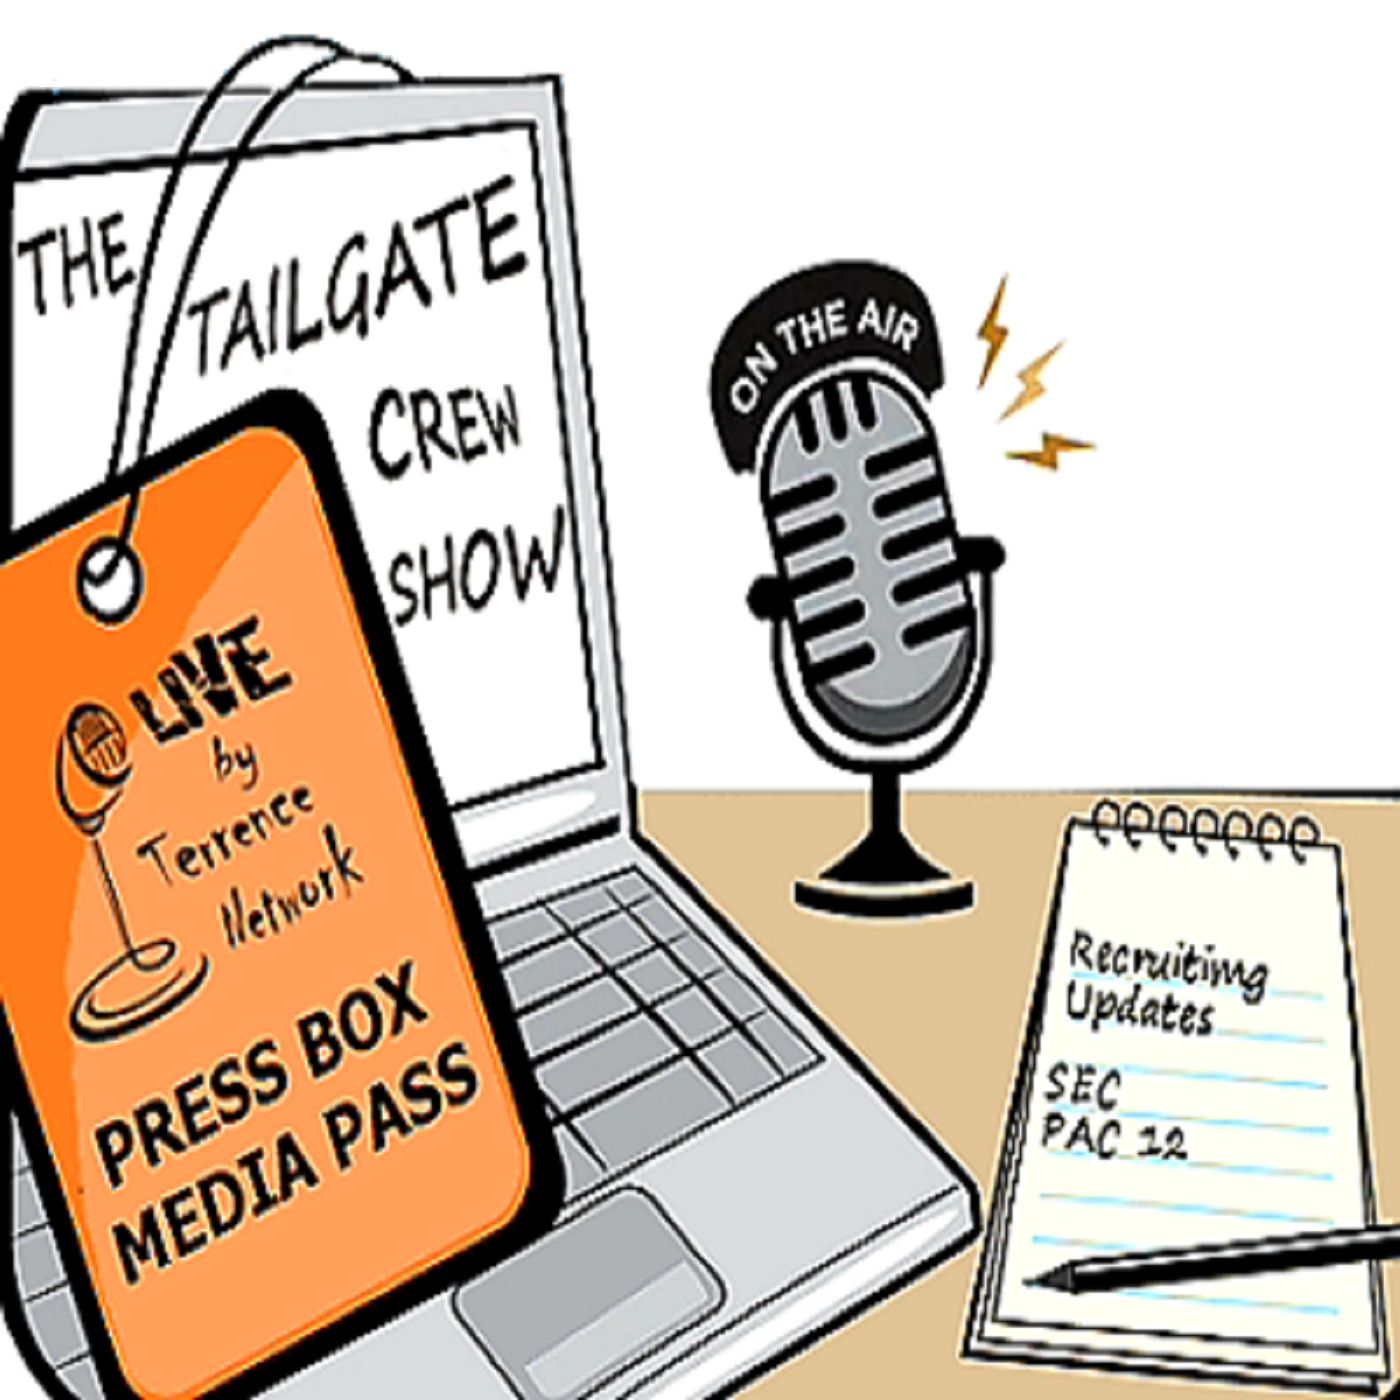 The Tailgate Crew Show featuring JiggSaw